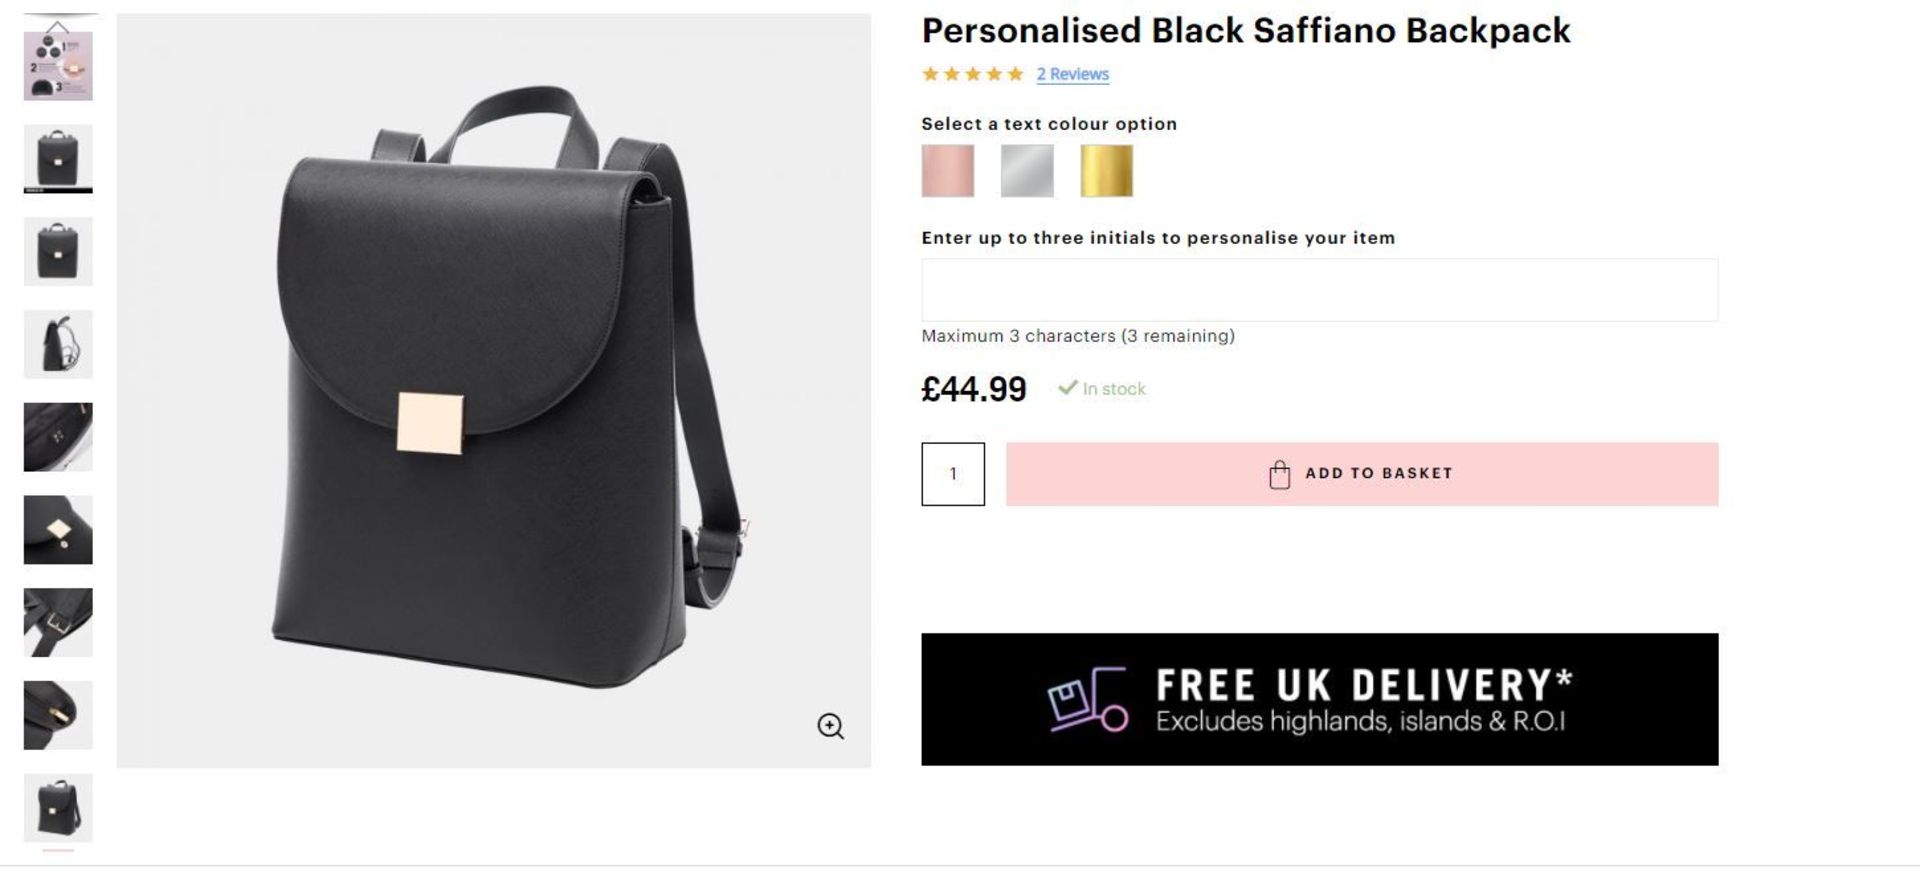 2 x NEW PACKAGED Beauti Saffiano Backpack - Black. RRP £49.99 each. Note: Item is not personalised.